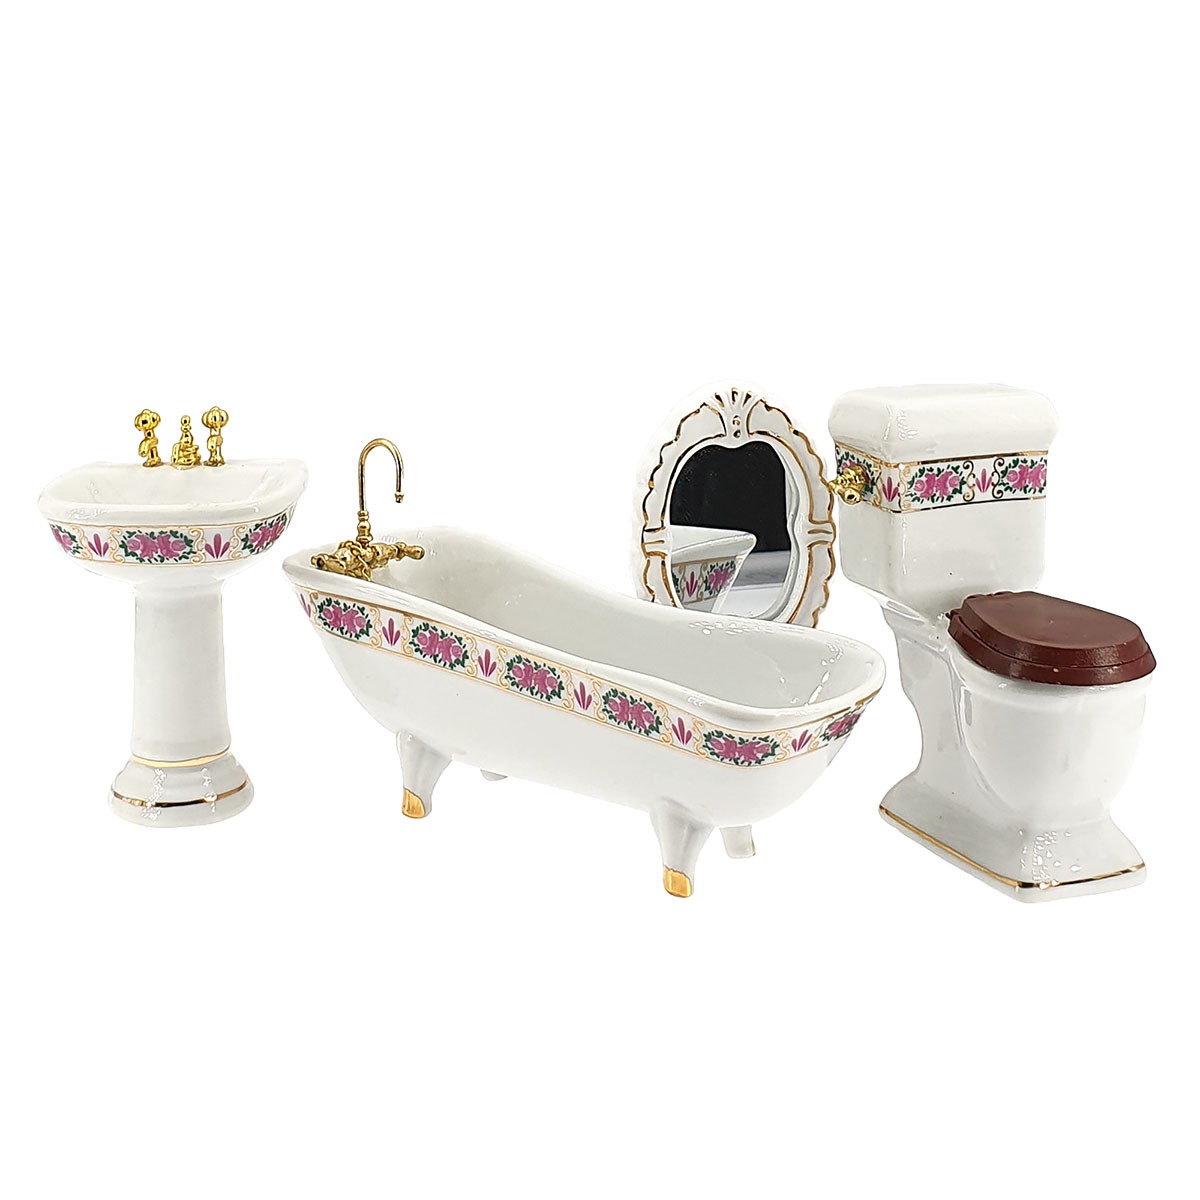 Bathroom, deluxe, porcelain, white, with décor